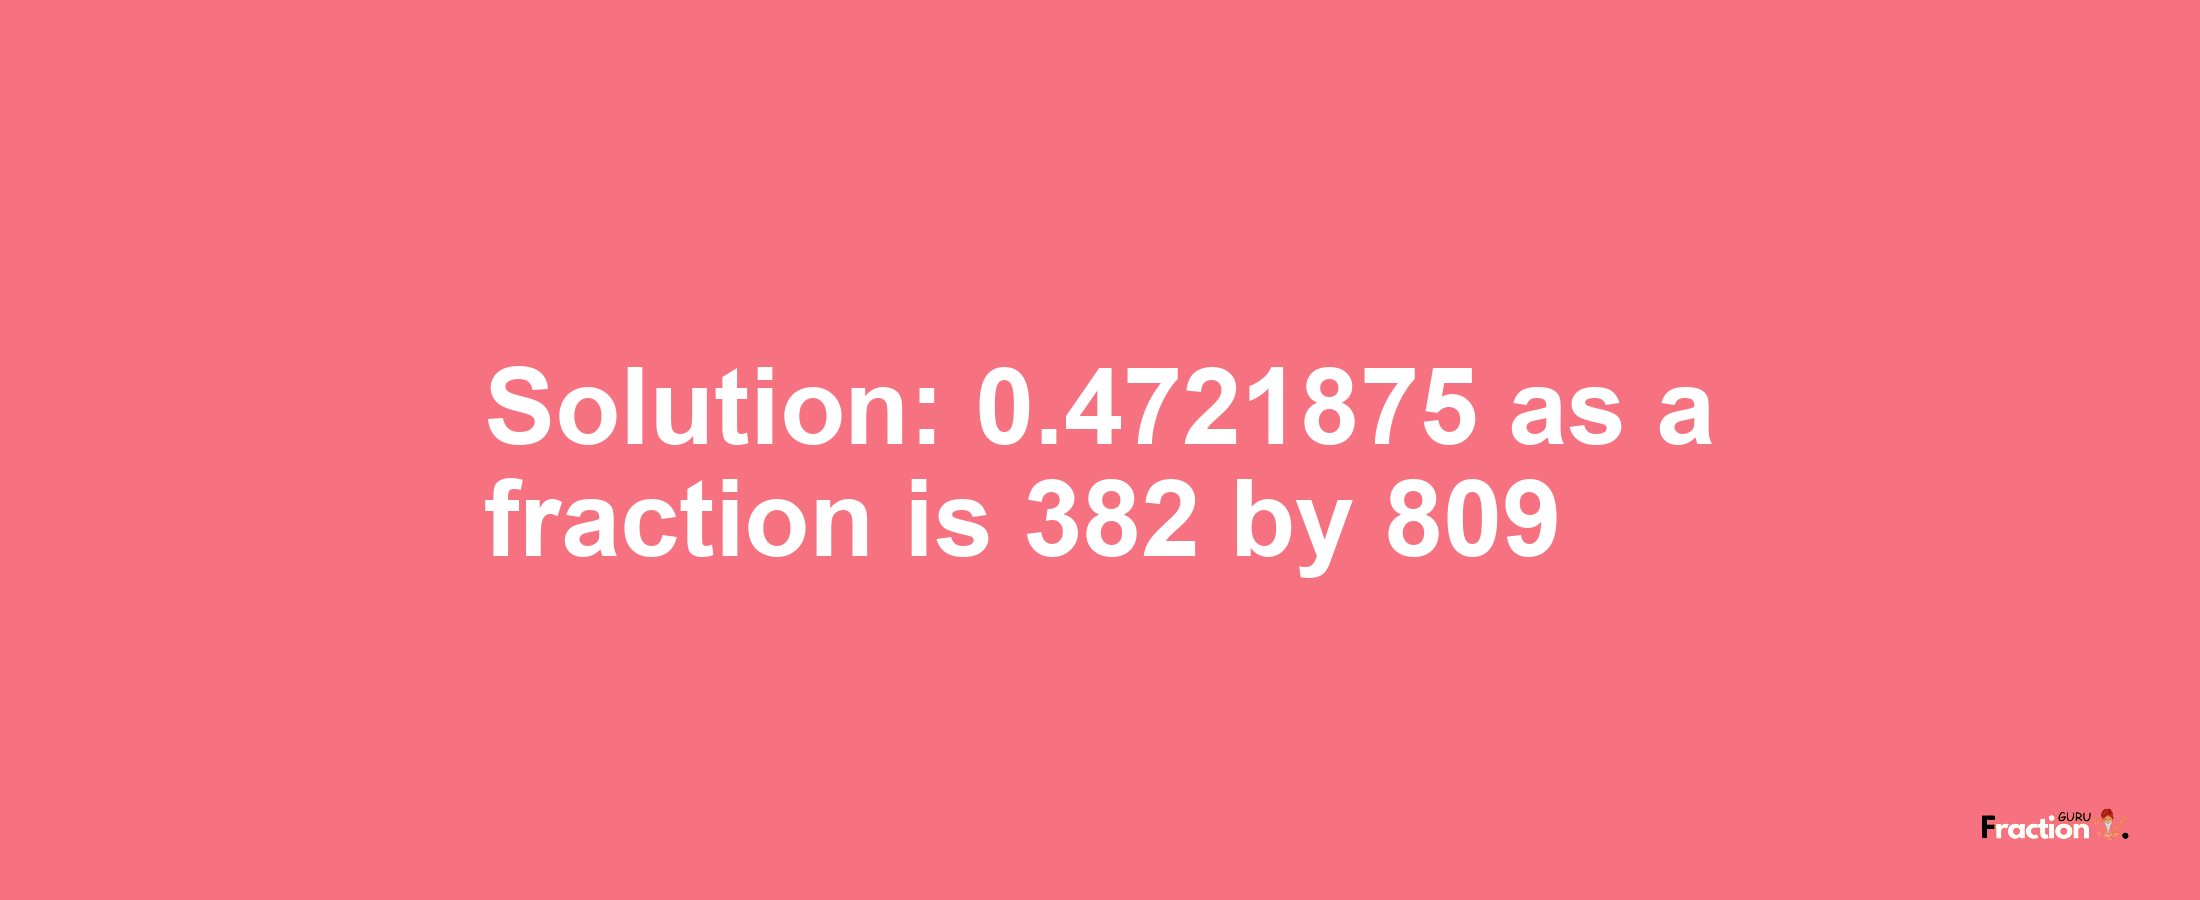 Solution:0.4721875 as a fraction is 382/809